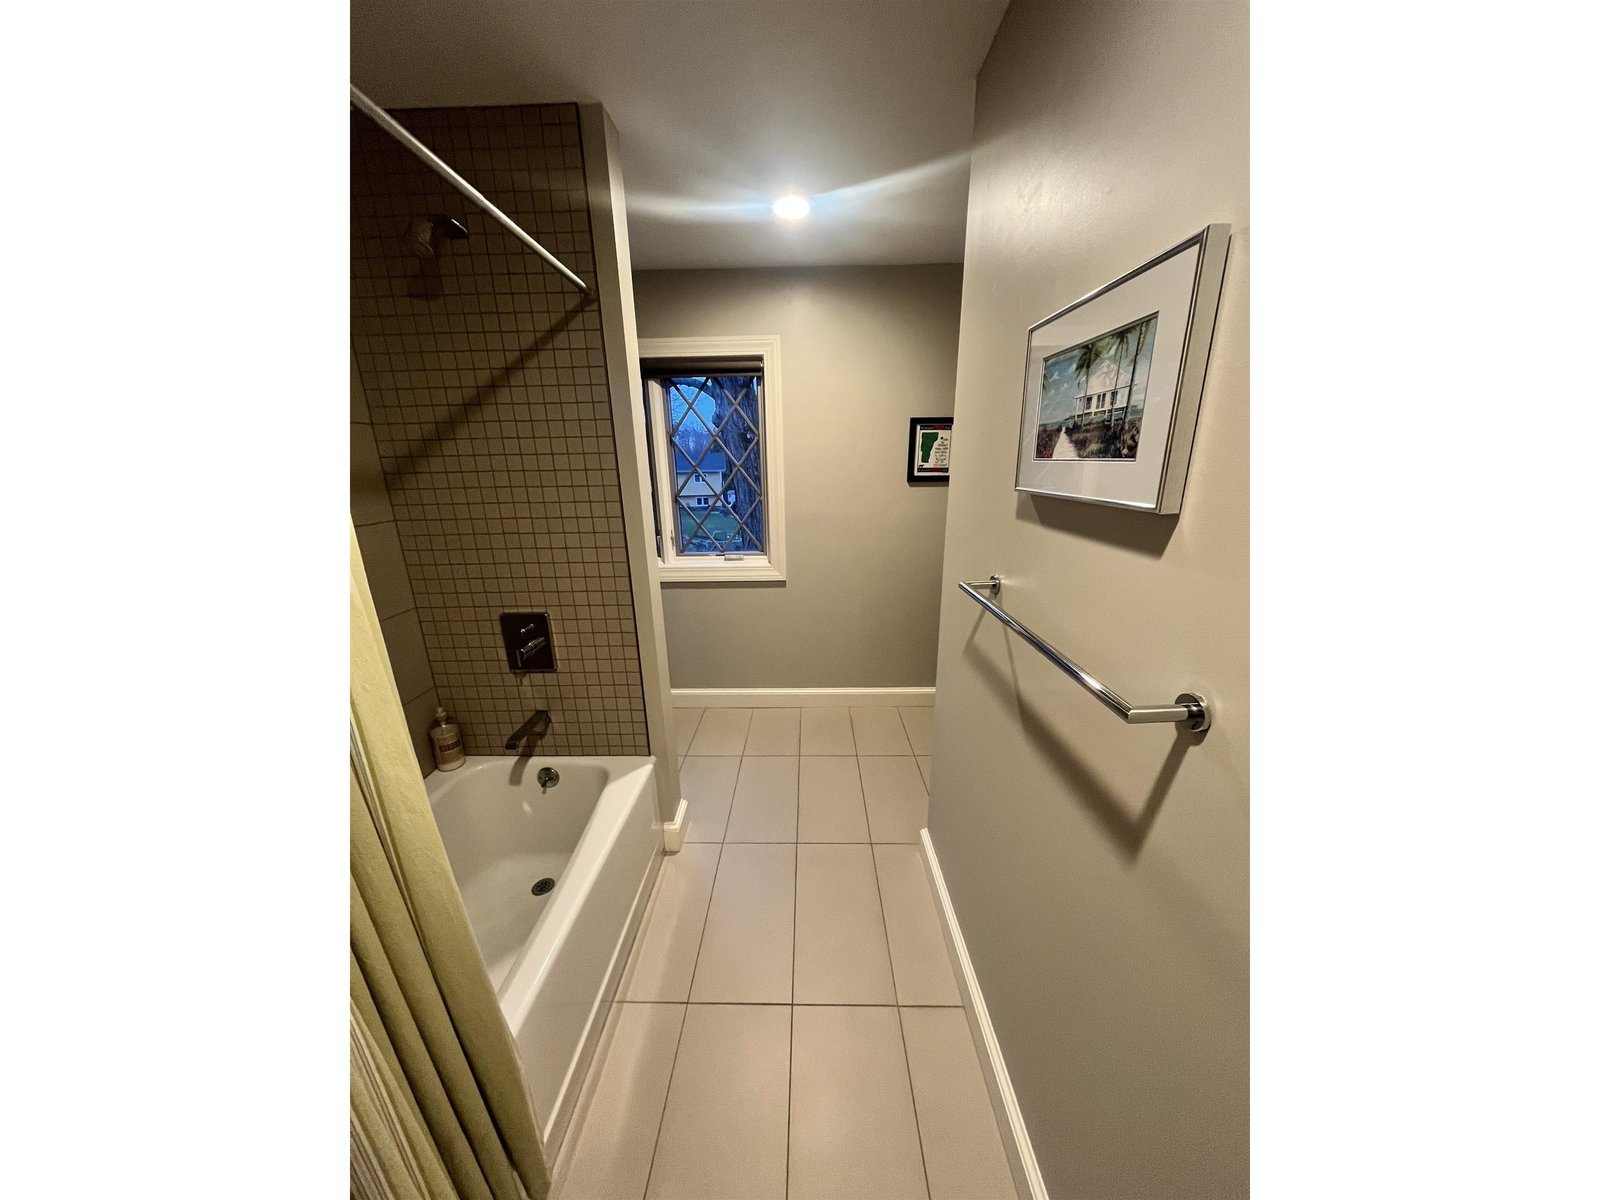 Hall bath which connects to 2nd ensuite bedroom with high mounted shower head